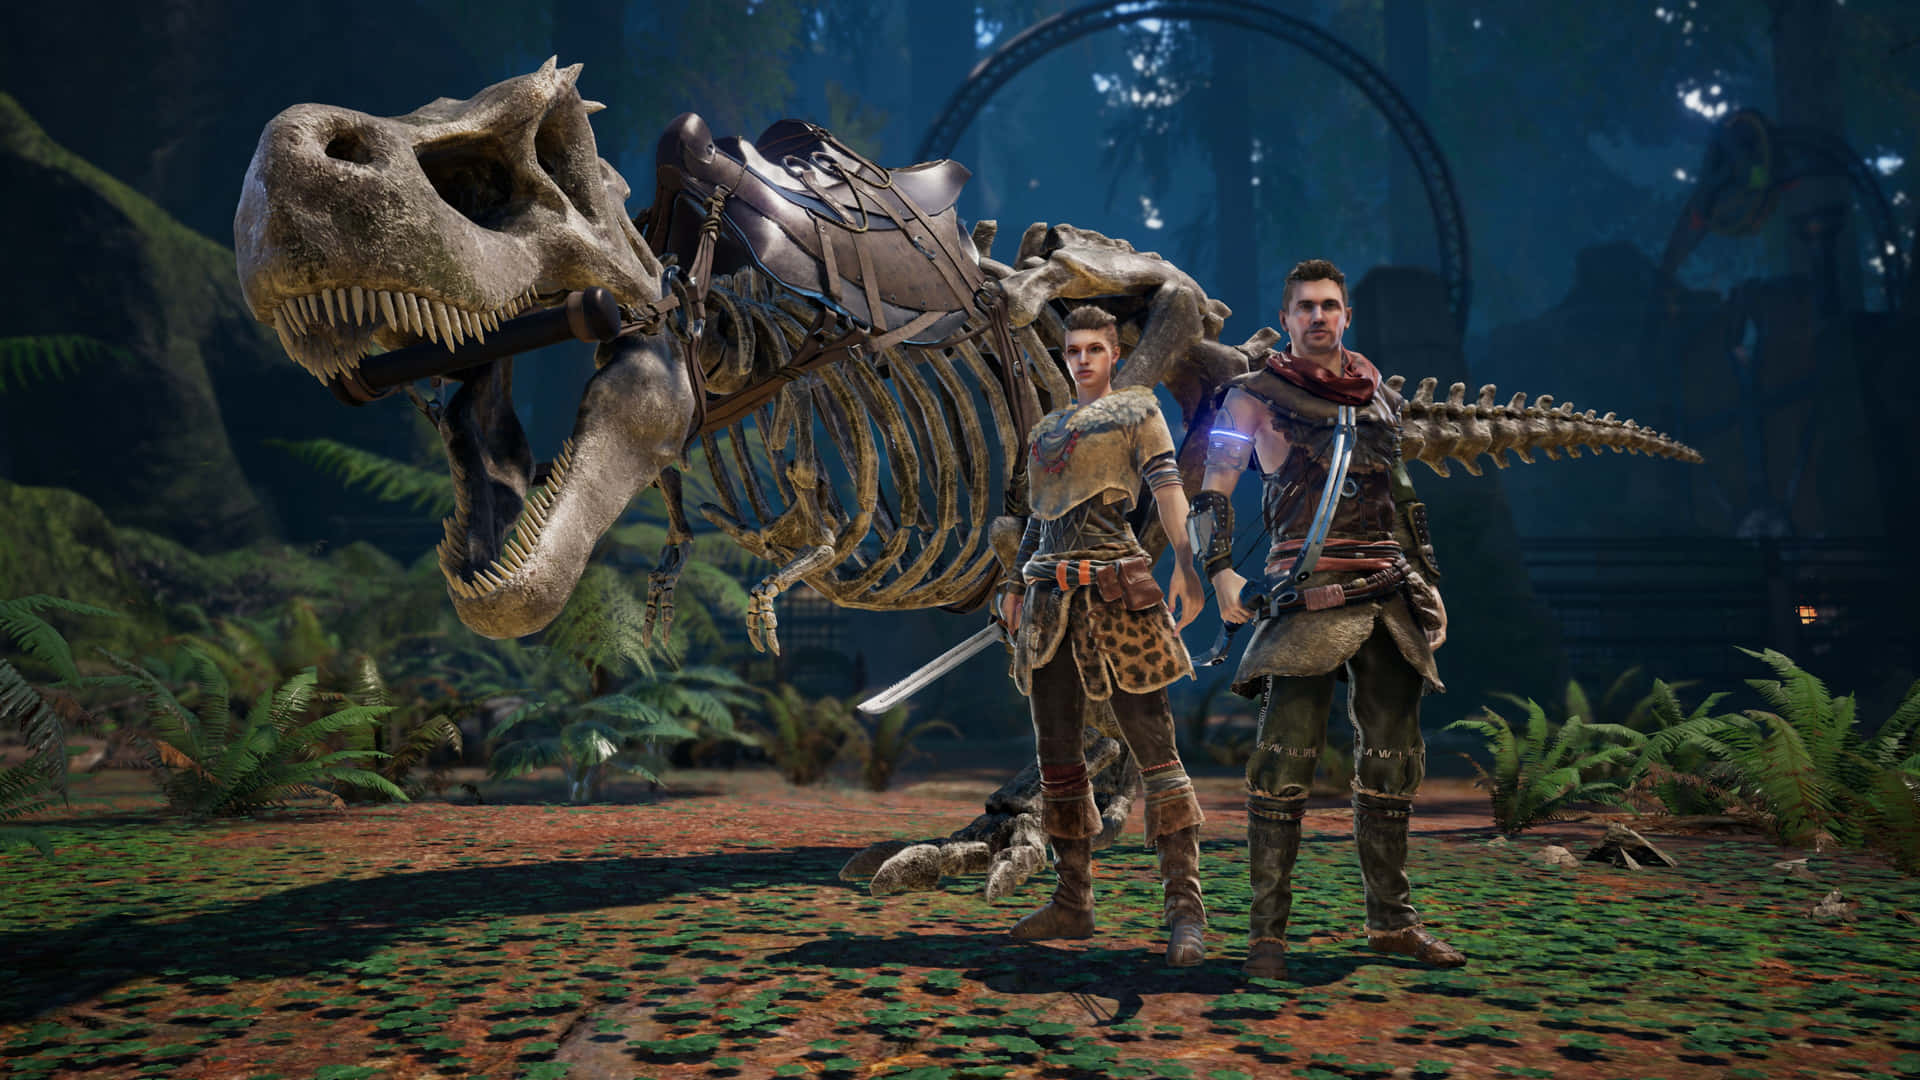 A Woman And A Man Standing In Front Of A Dinosaur Skeleton Wallpaper